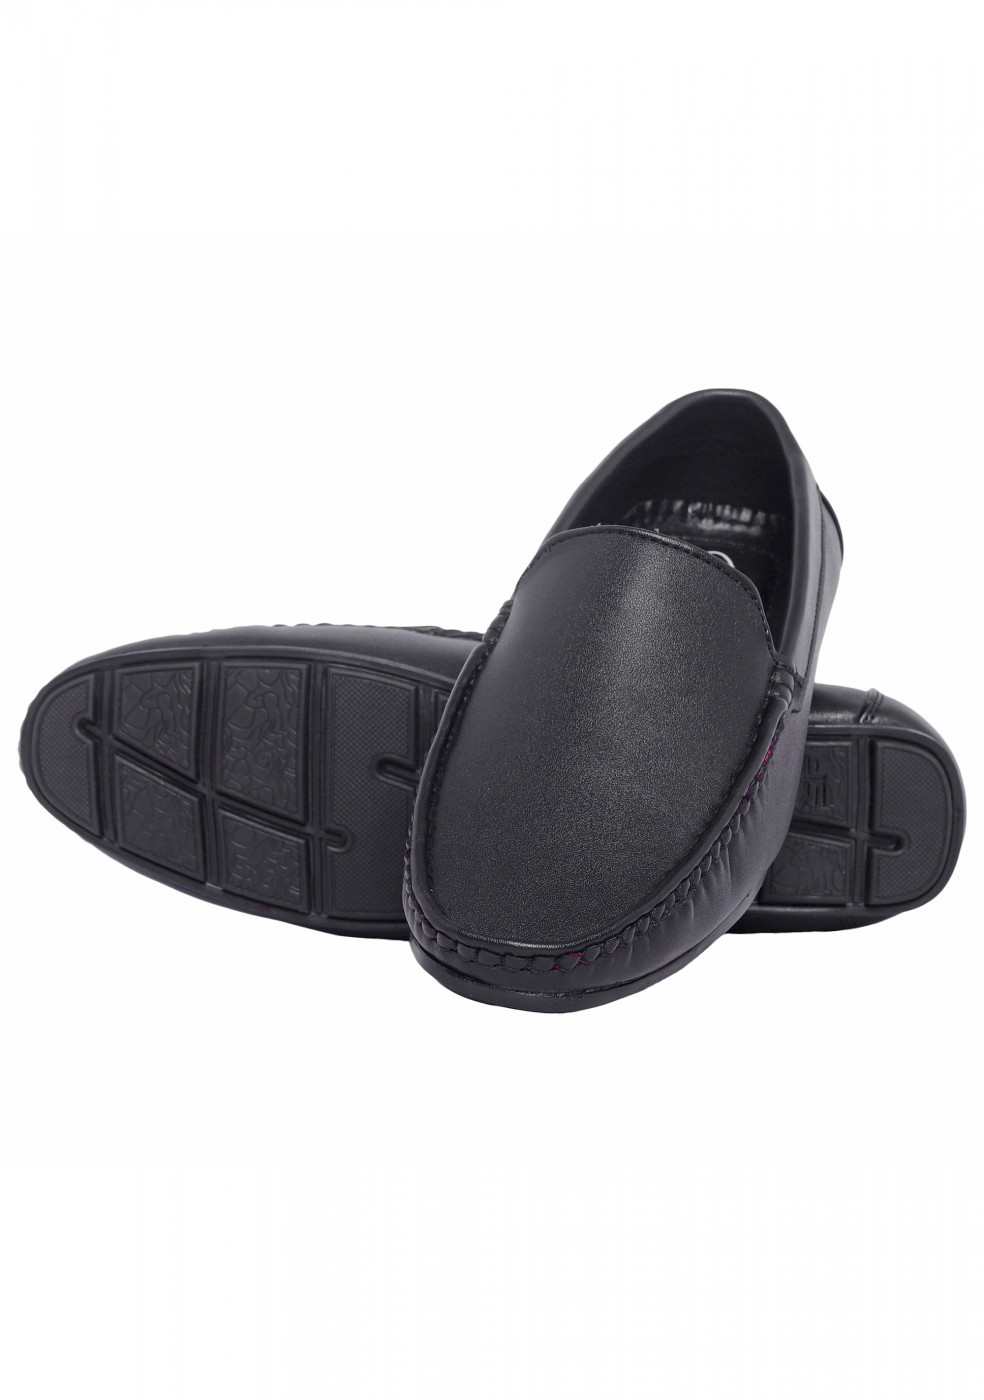 XSTOM Comfortable Black Casual Loafers For Men